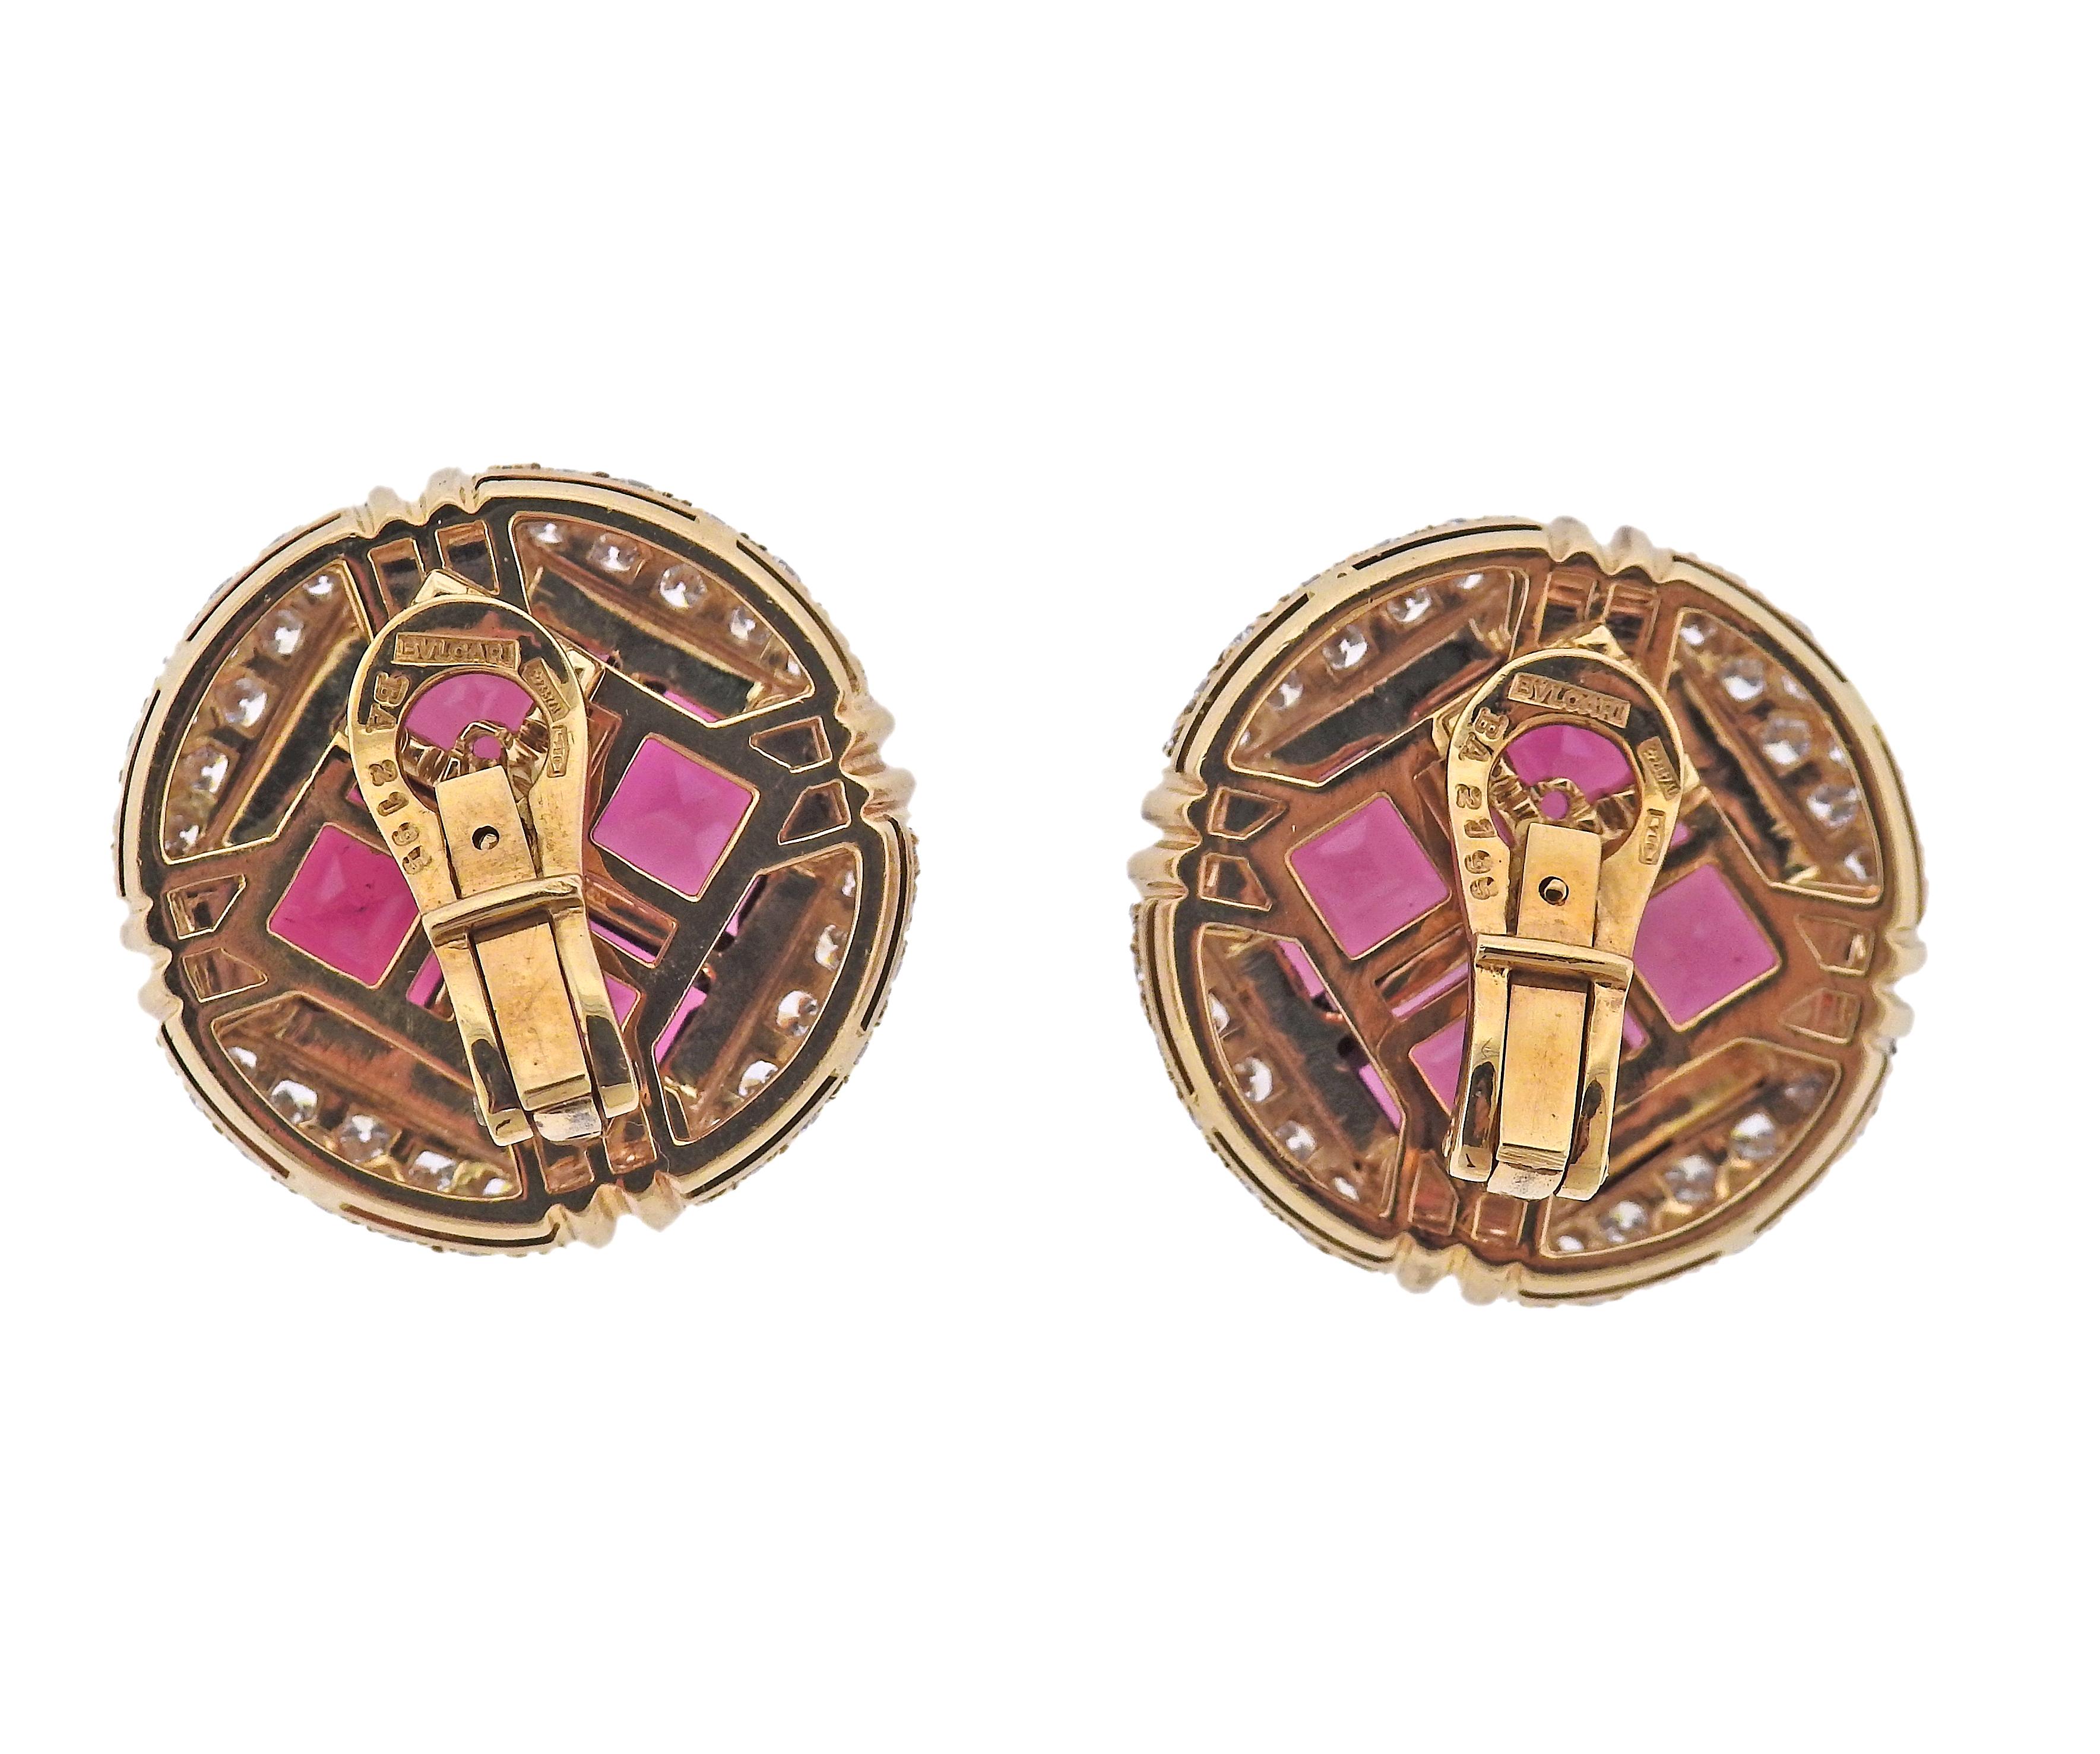 Bvlgari 18k yellow gold earrings, with 3.03ctw G/Vs diamonds and 18.50ctw in rubillite. Come with Bvlgari box and a copy of Insurance Appraisal report from 1992. Earrings are 25mm in diameter. Weight - 33.6 grams. Marked: BA 2195, Bvlgari, 750,